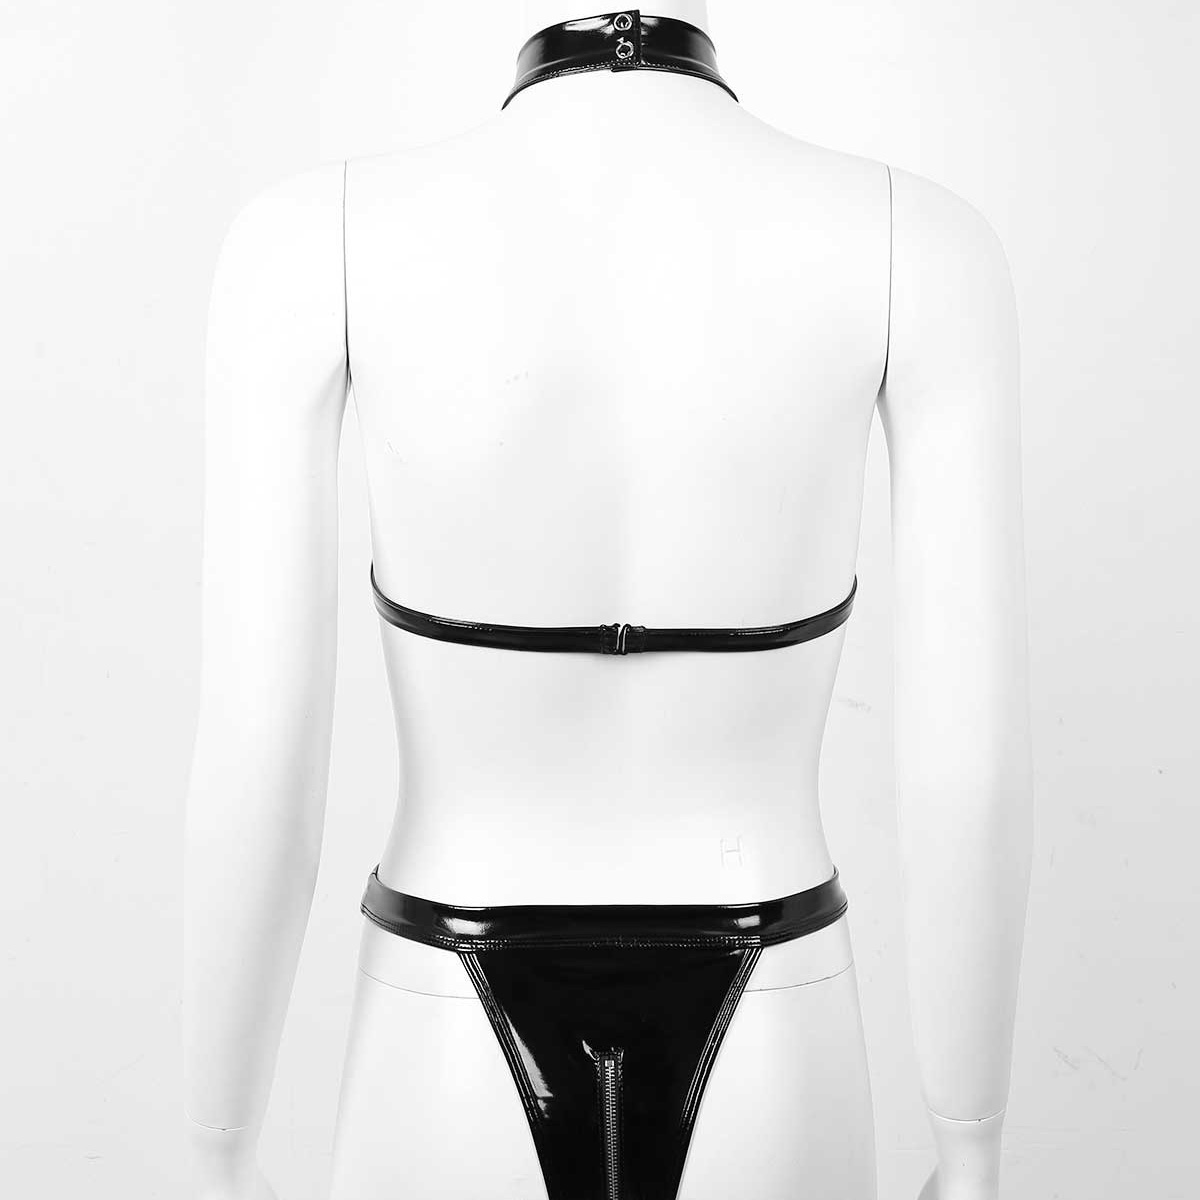 Hot Wet Look Exotic Teddies Leather Lingerie / Nipples Cups Zippered Crotch / High Cut Body Harness - EVE's SECRETS